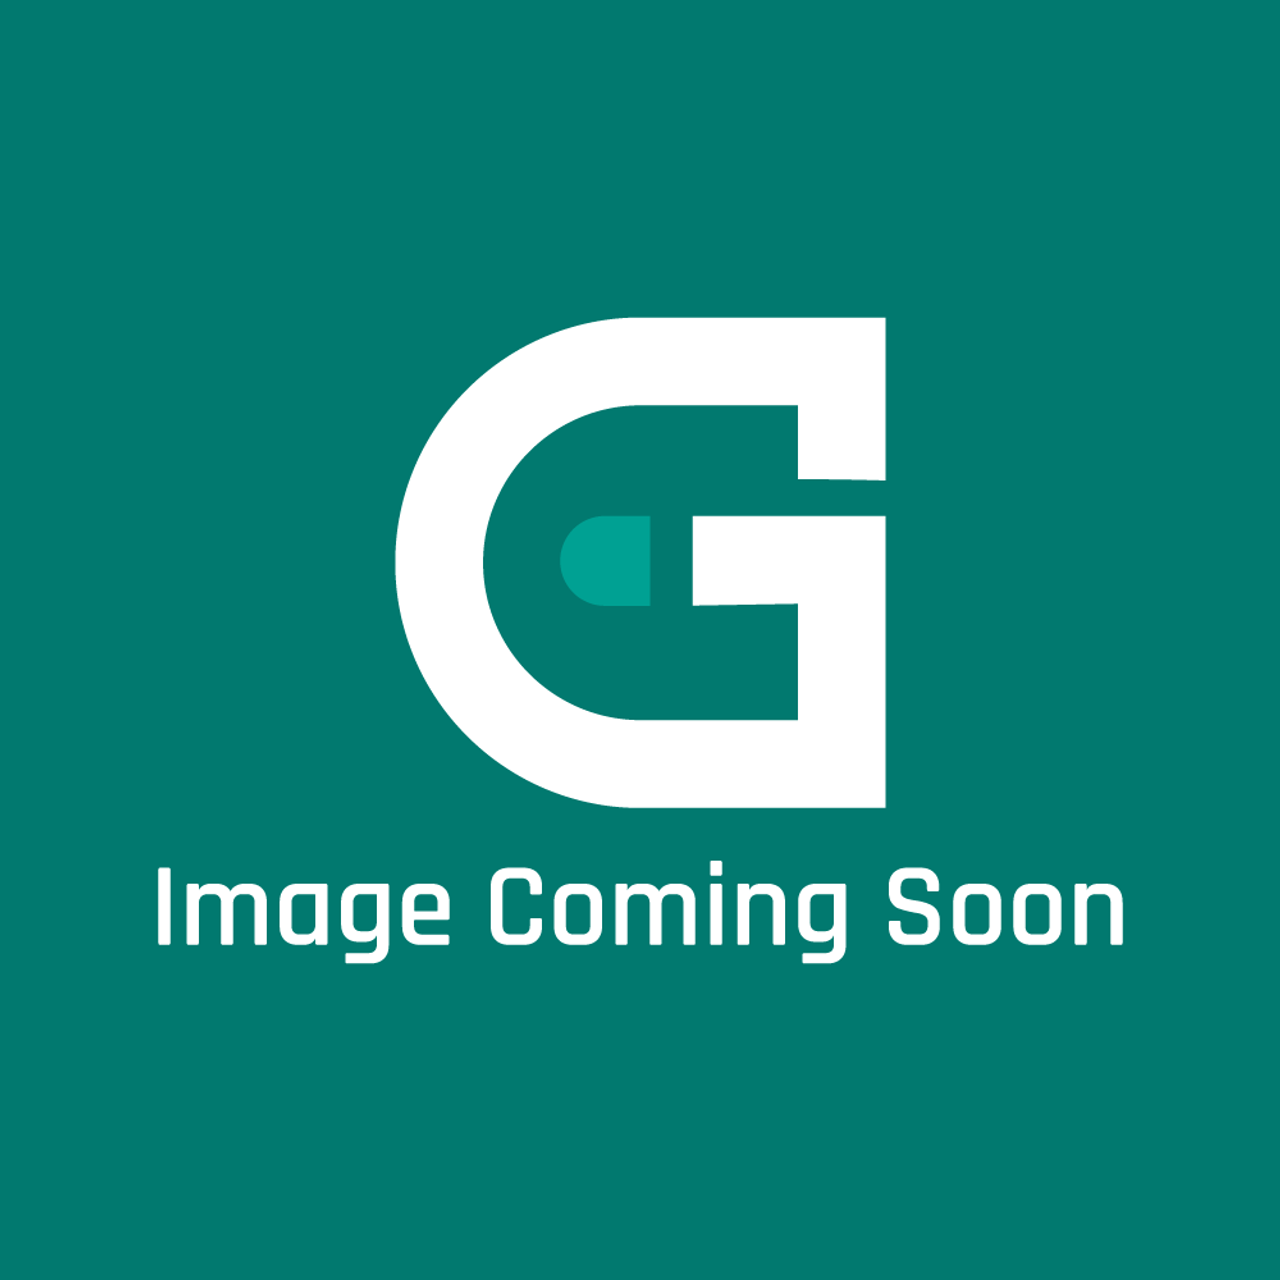 Garland 2224700 - Valve Panel Mst45R/Rc - Image Coming Soon!